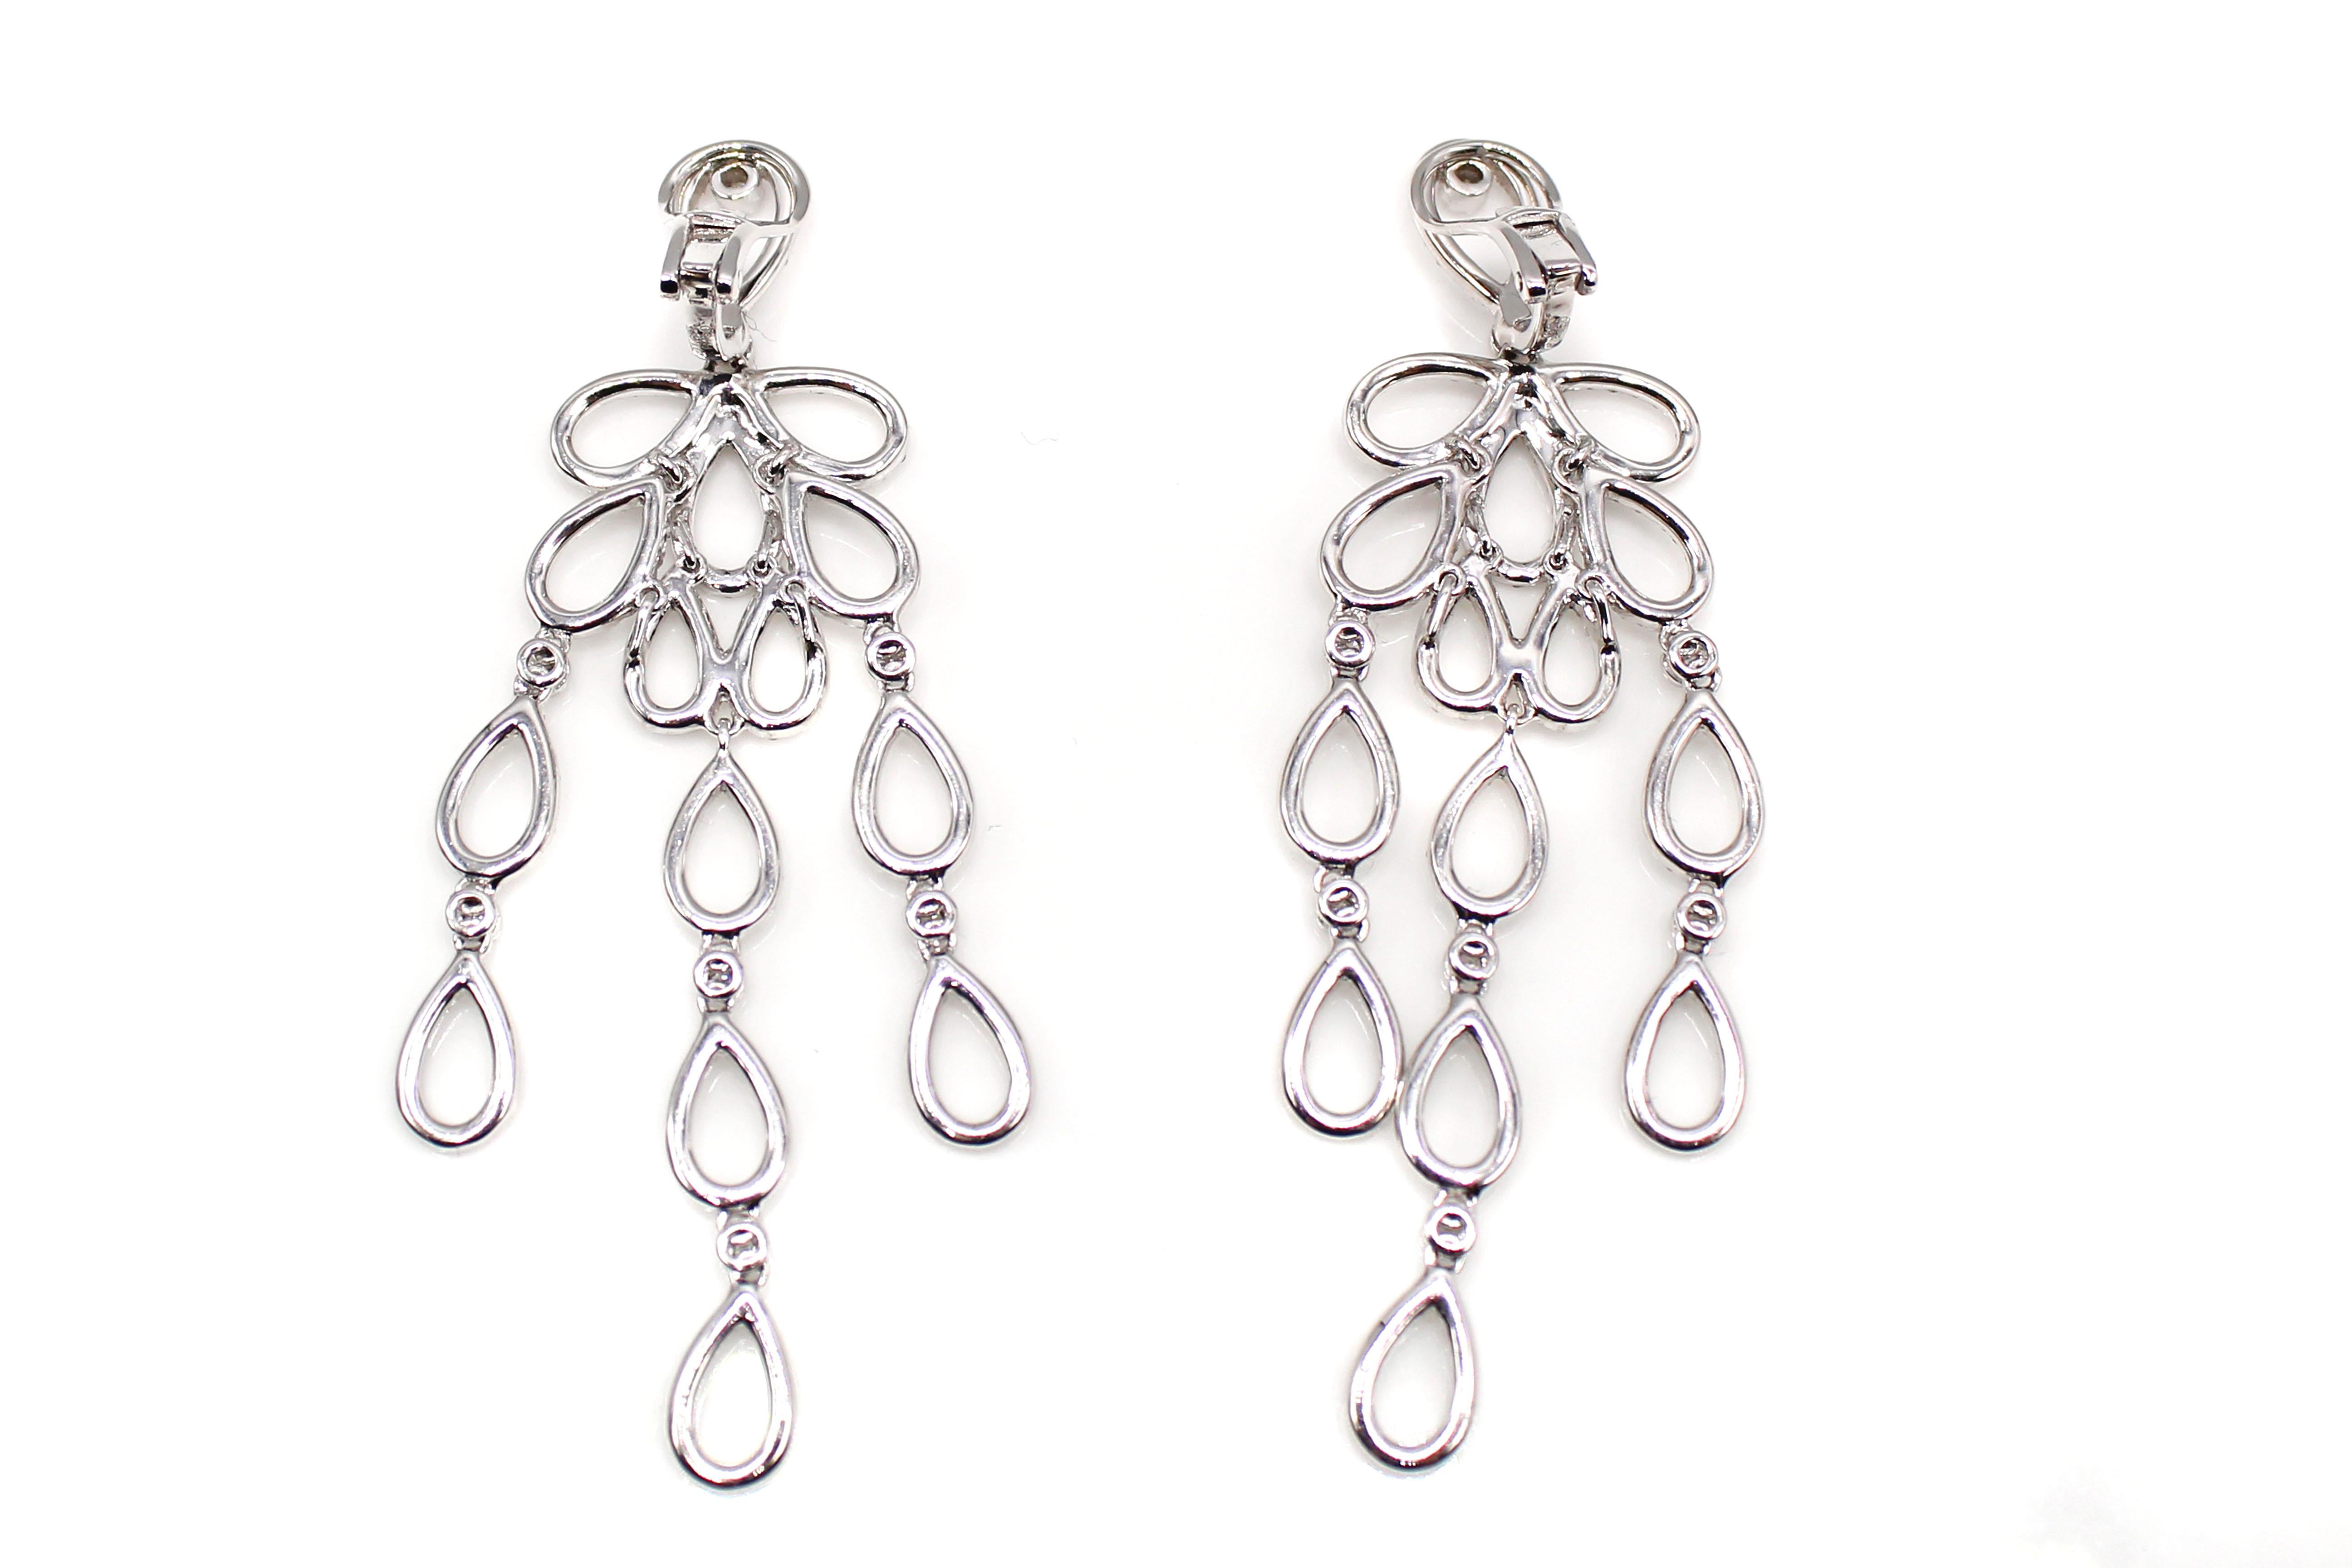 Gorgeous beautifully hand-crafted 18 karat white gold dangling earrings set with 248 bright white and sparkly round brilliant cut diamonds. The total diamond weight which is stamped on the back of the lever which connects to the omega clip back is